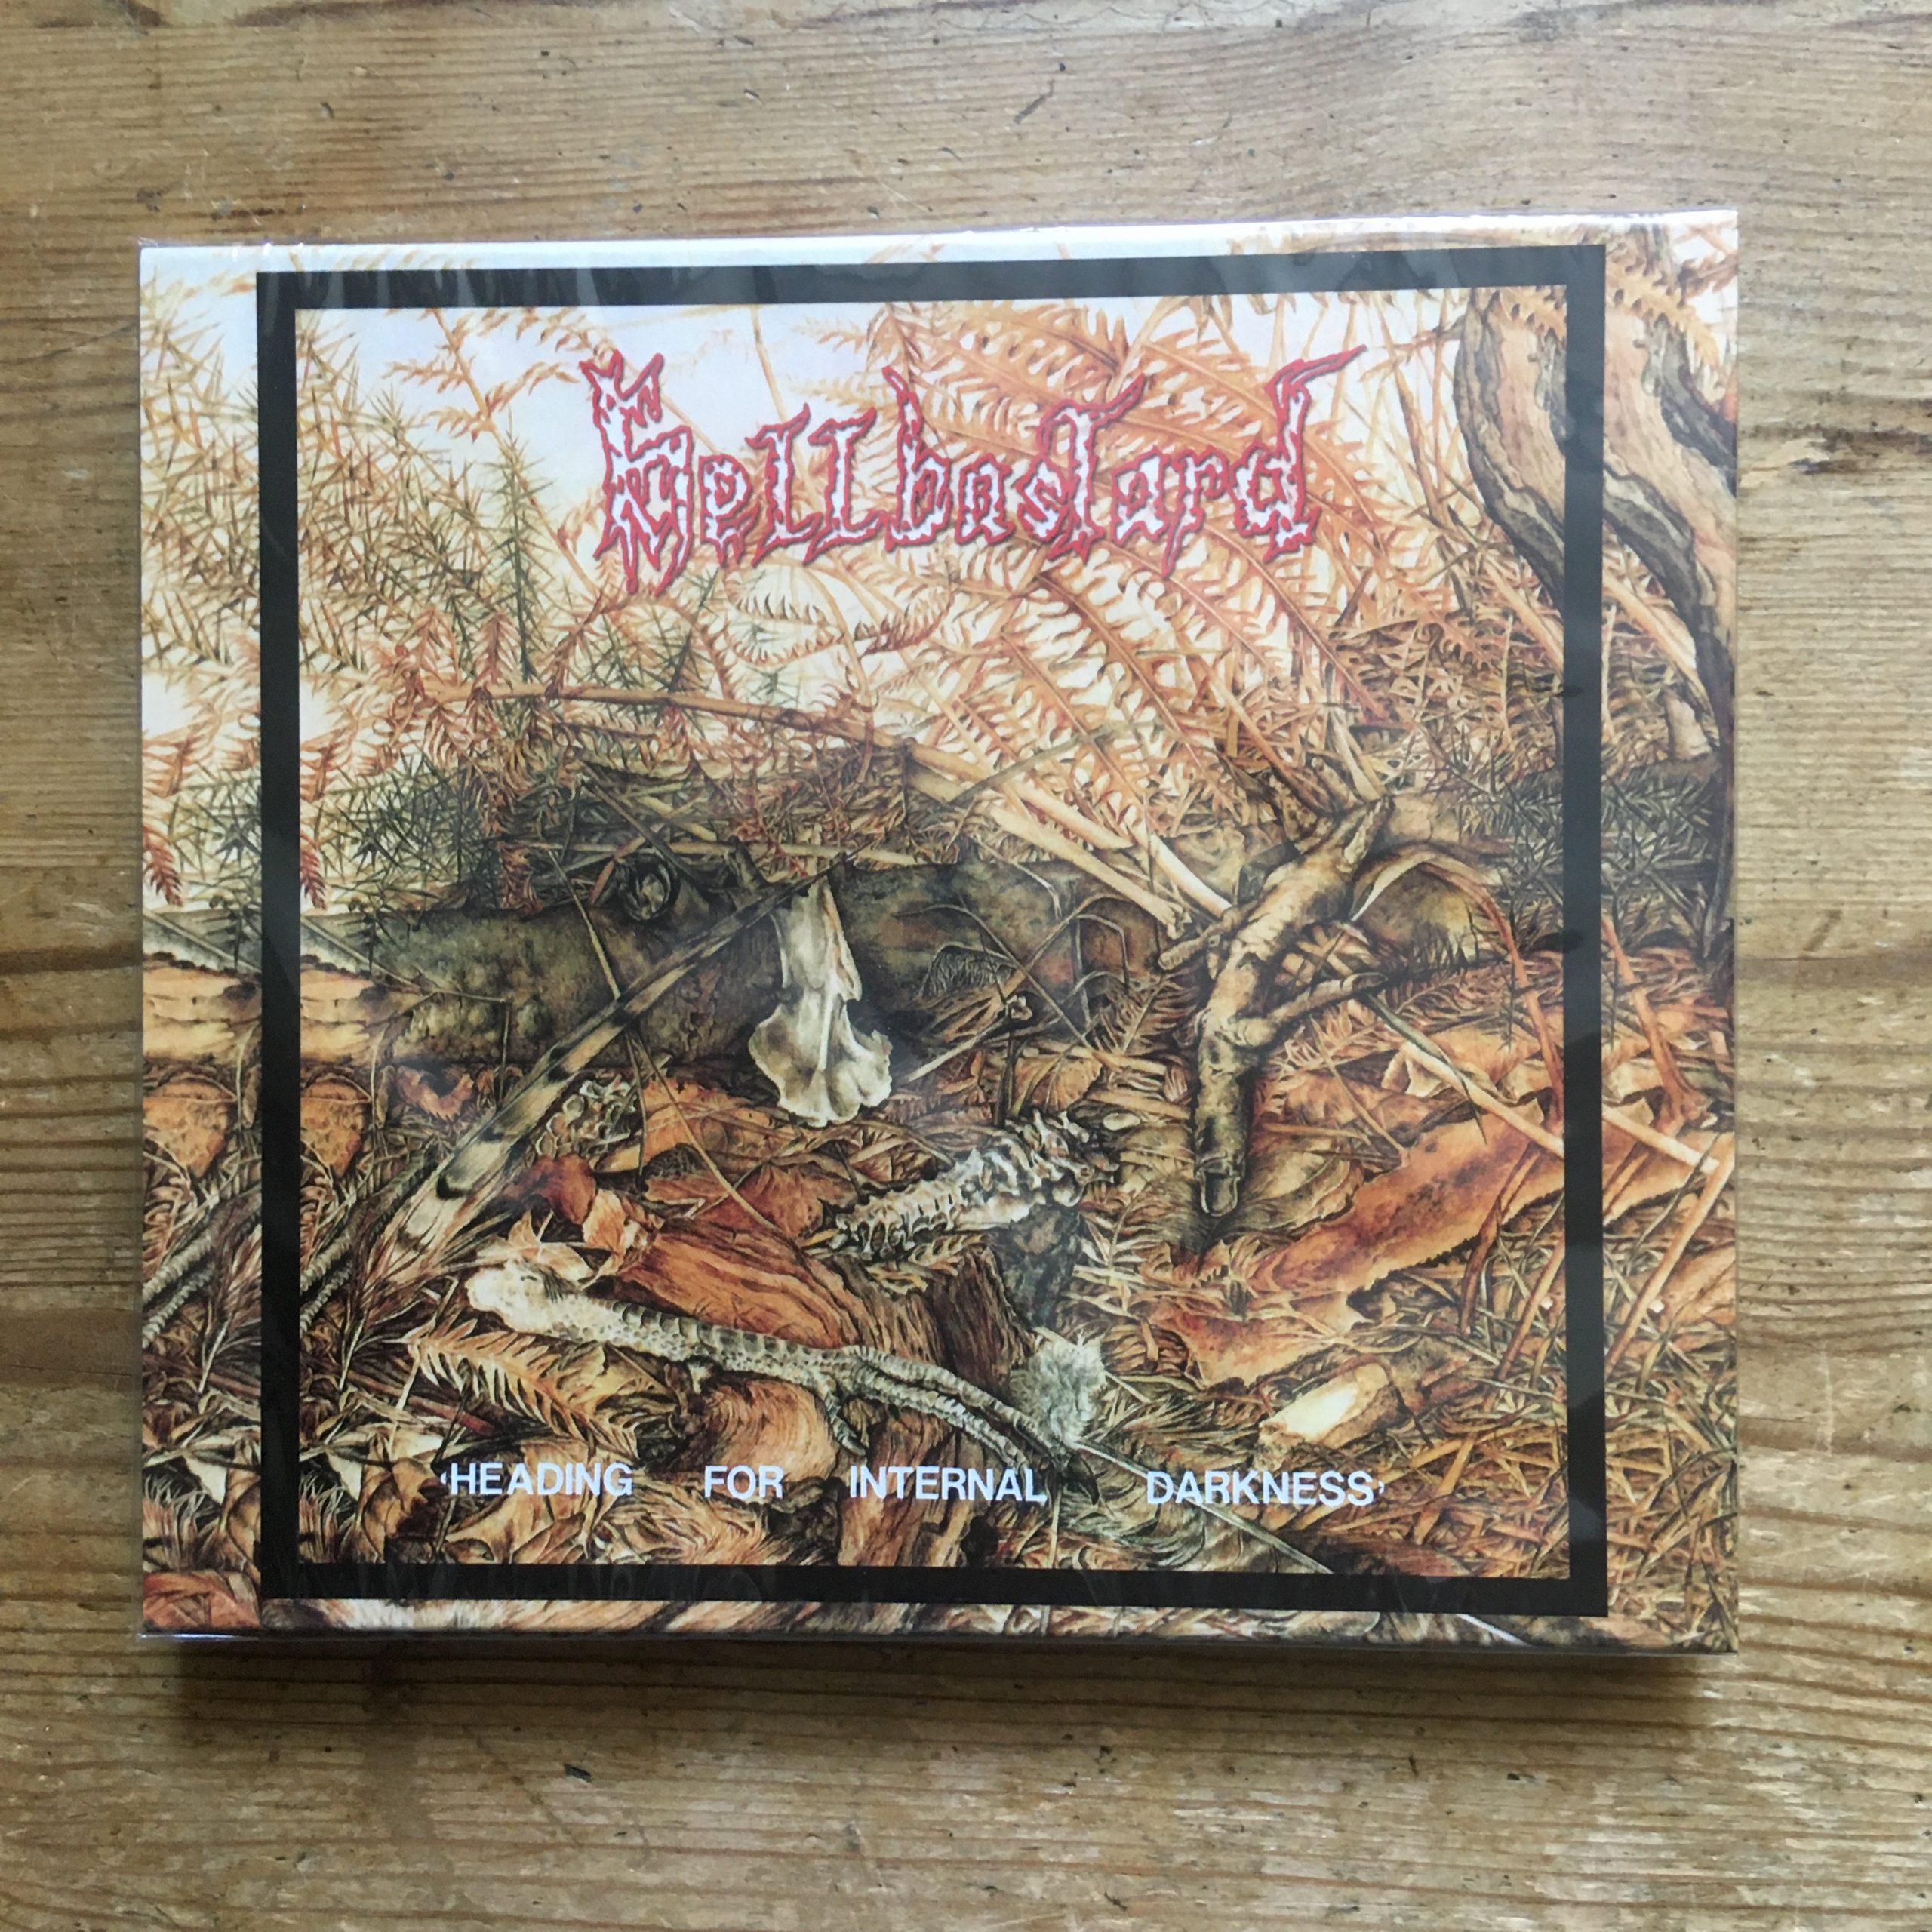 Photo of the Hellbastard - "Heading for Internal Darkness" CD